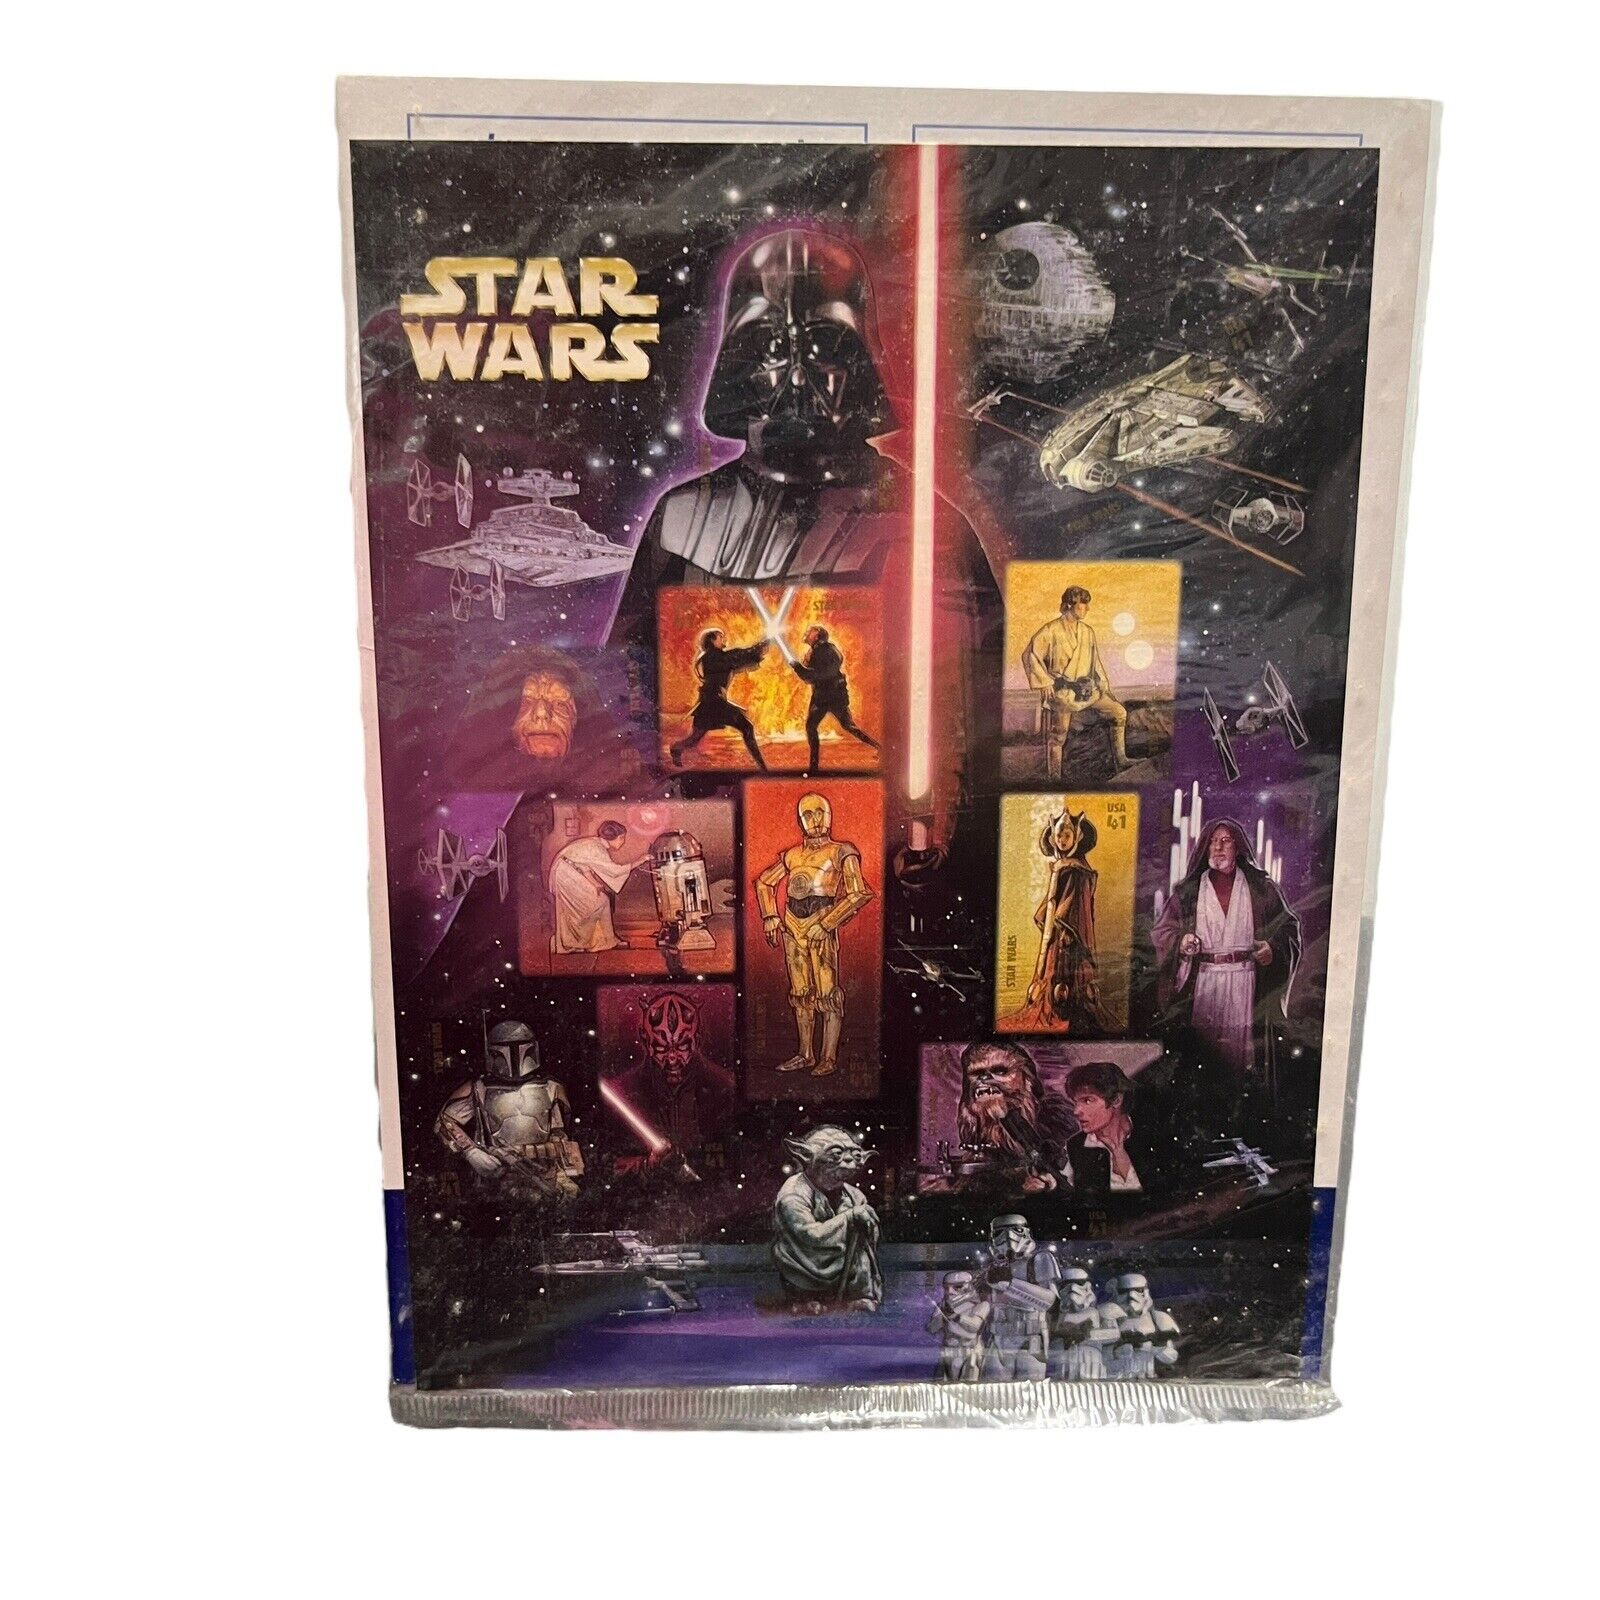 STAR WARS 2007 Commemorative 30TH Anniversary Stamp Sheet .41 CENT STAMPS